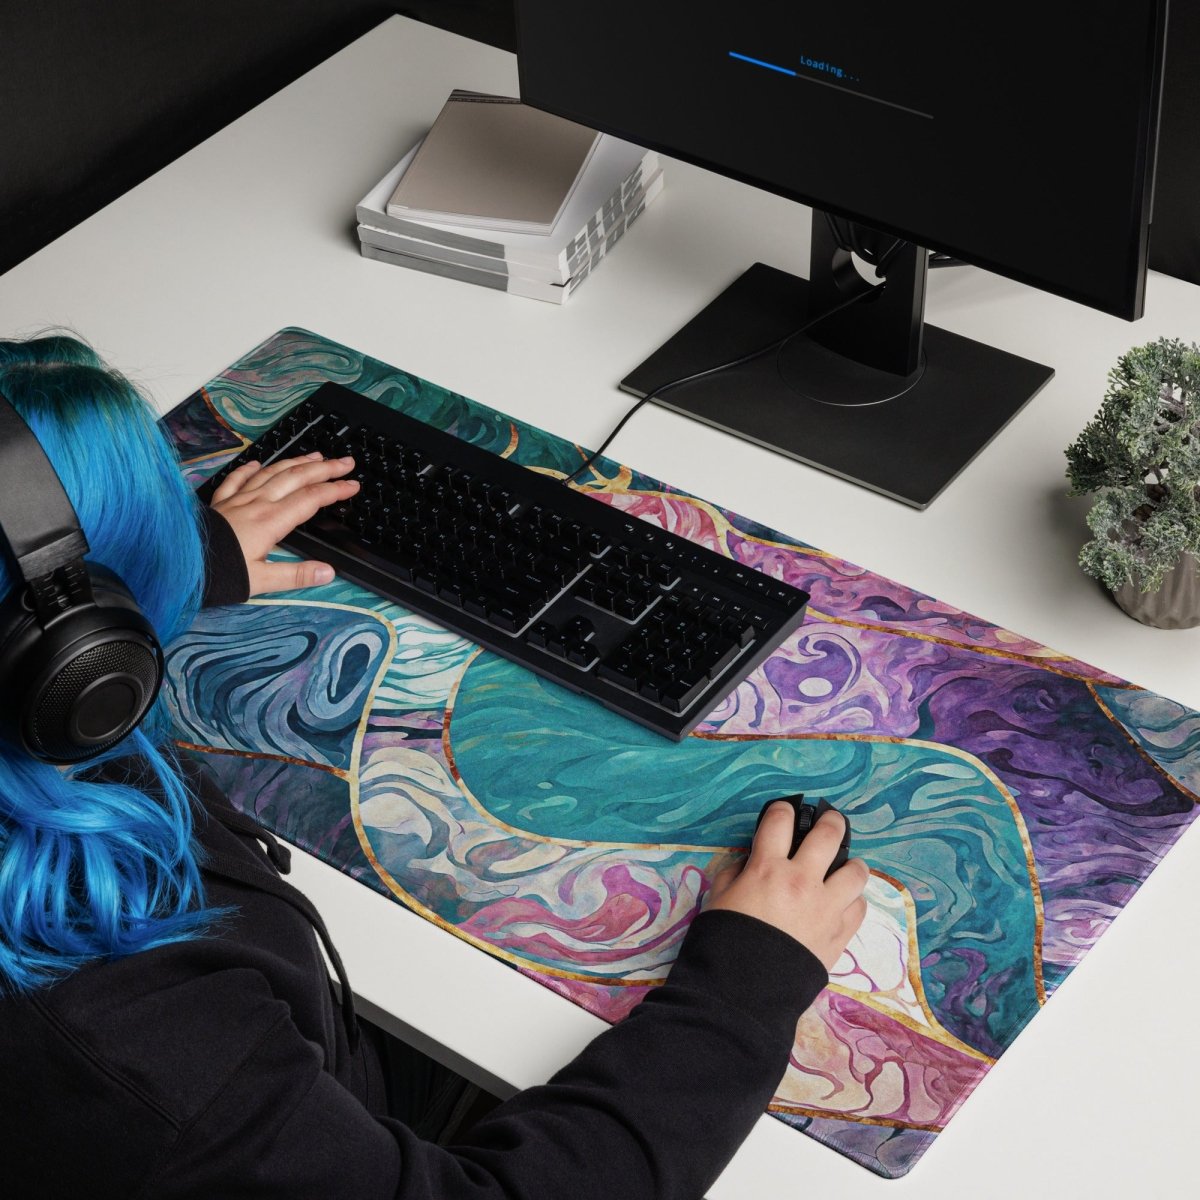 Dragon abstraction - Gaming mouse pad - Ever colorful